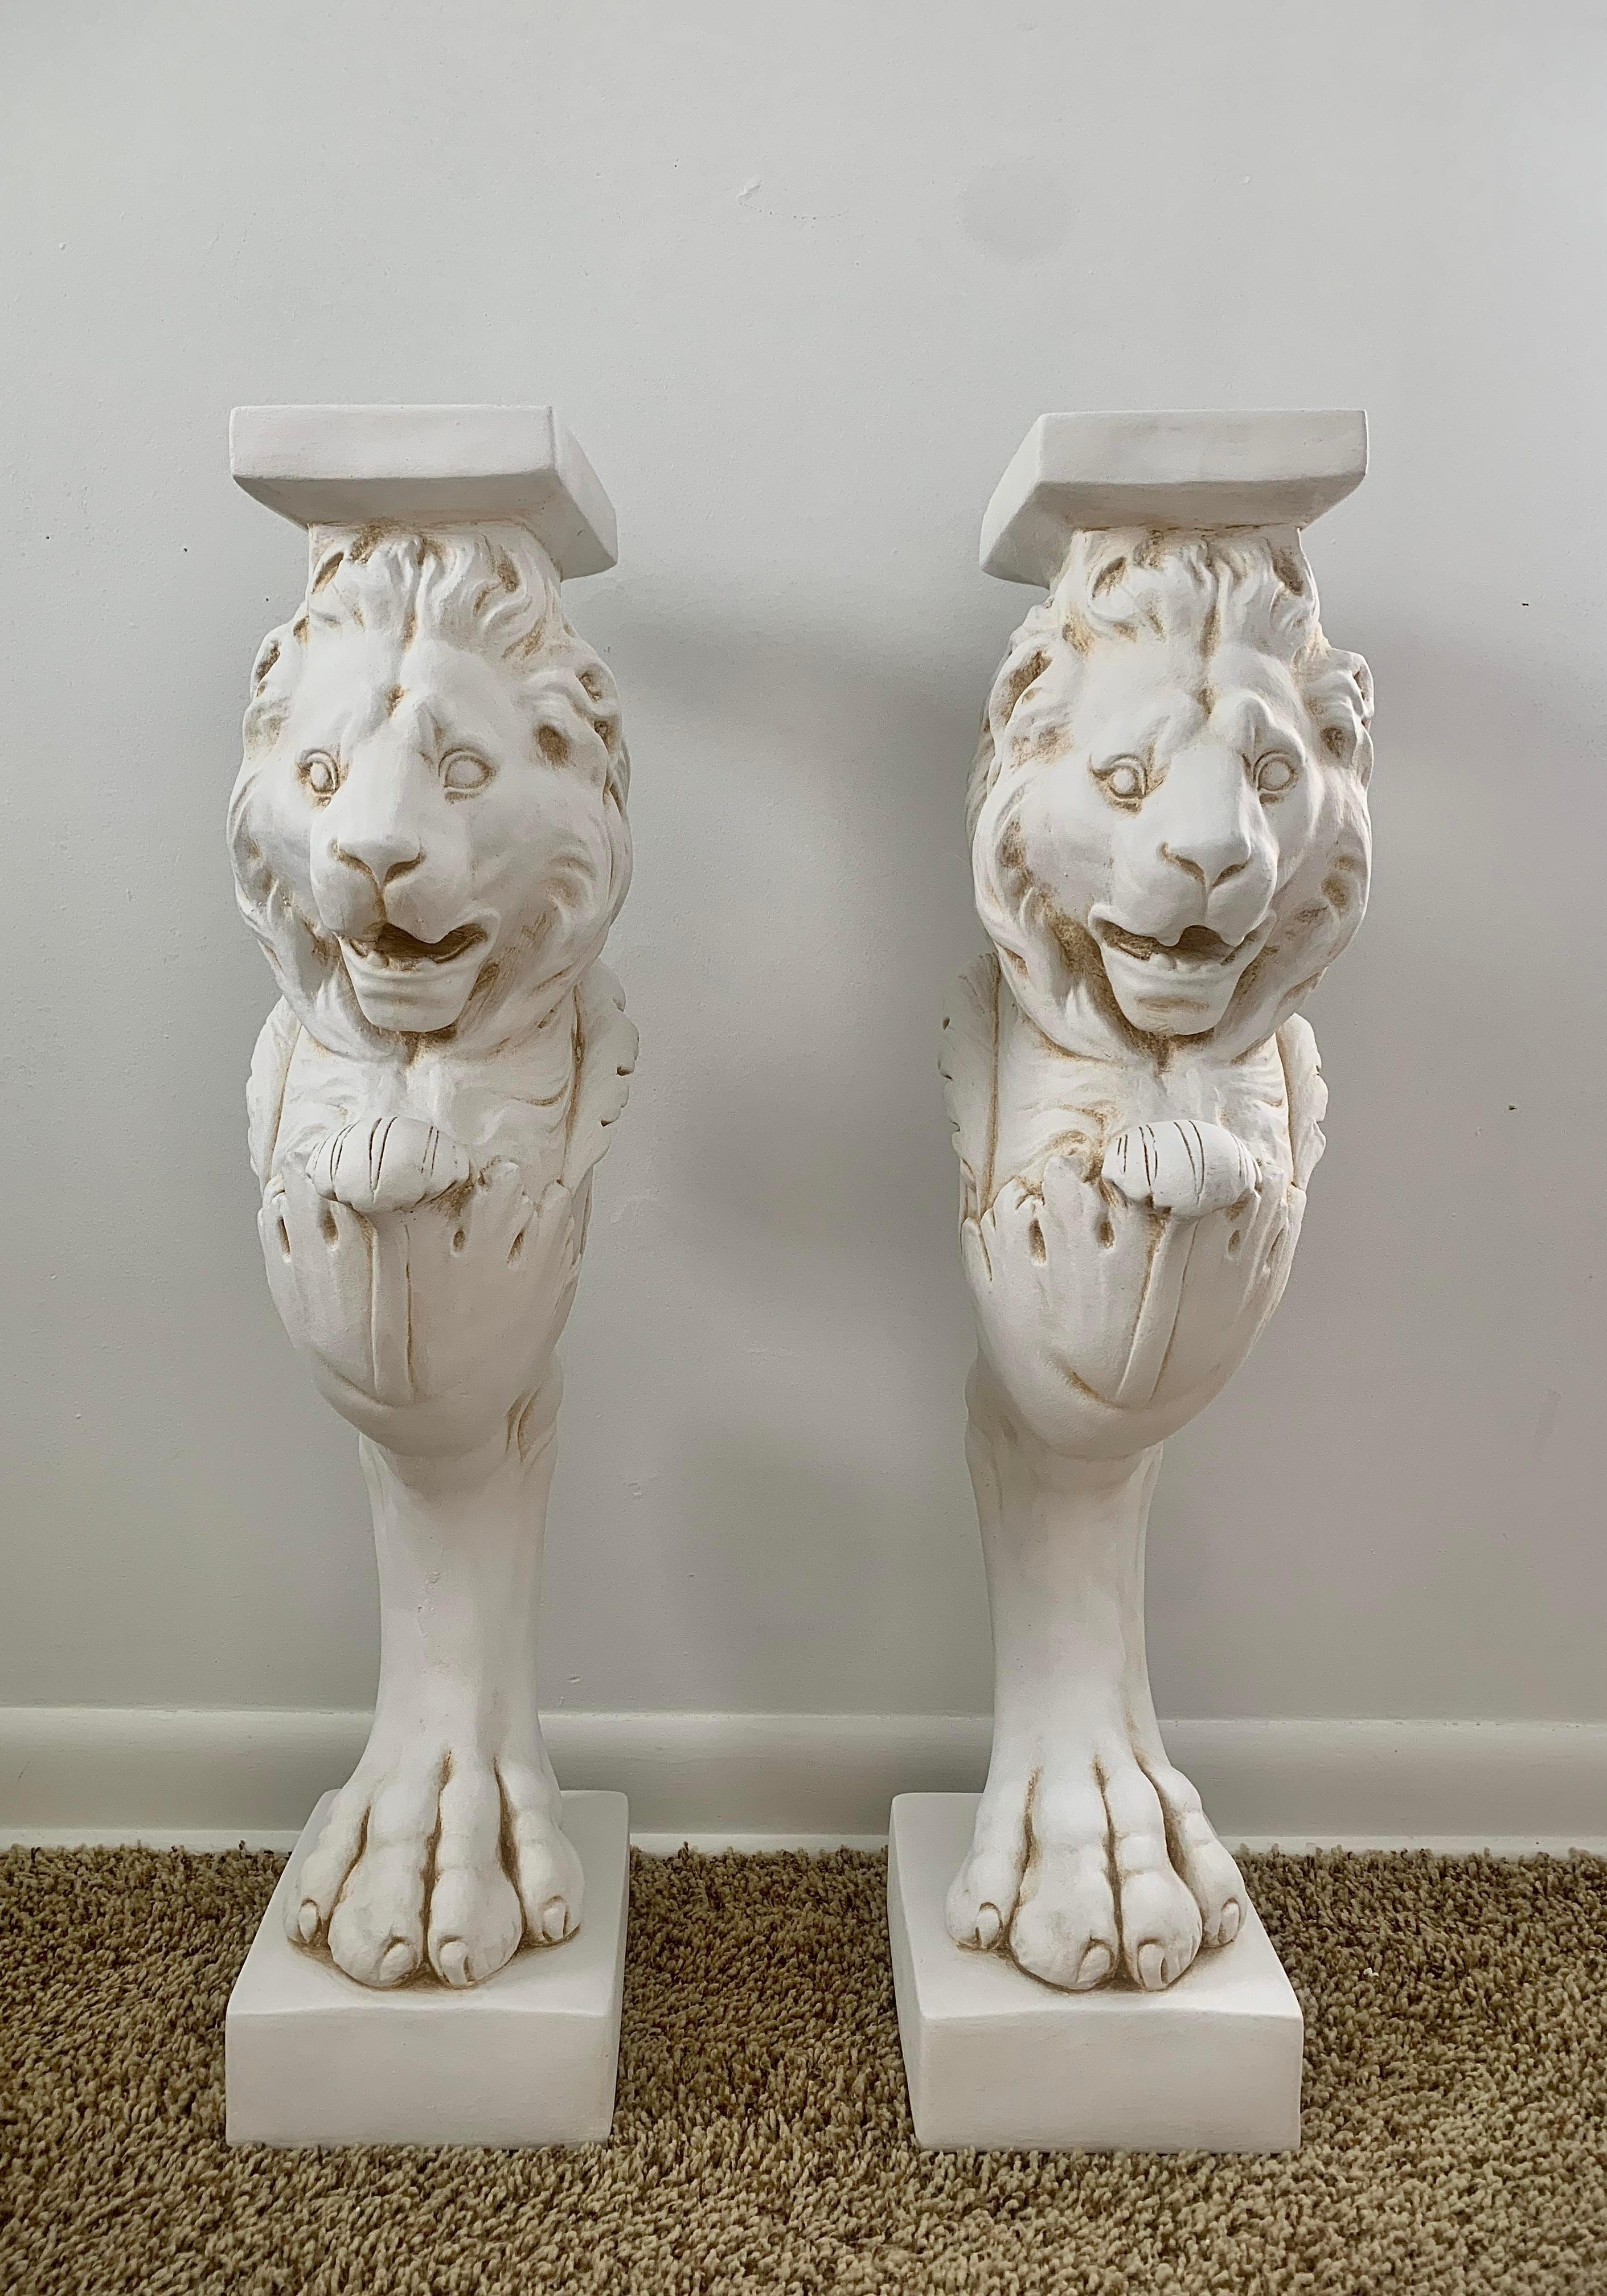 A pair of cast plaster neoclassical style Roman lion pedestals, for use on their own or to hold a tabletop to create a console table. These pedestals could support a marble, zinc, or glass top.

USA, Early 21st Century

Measures: 6.75